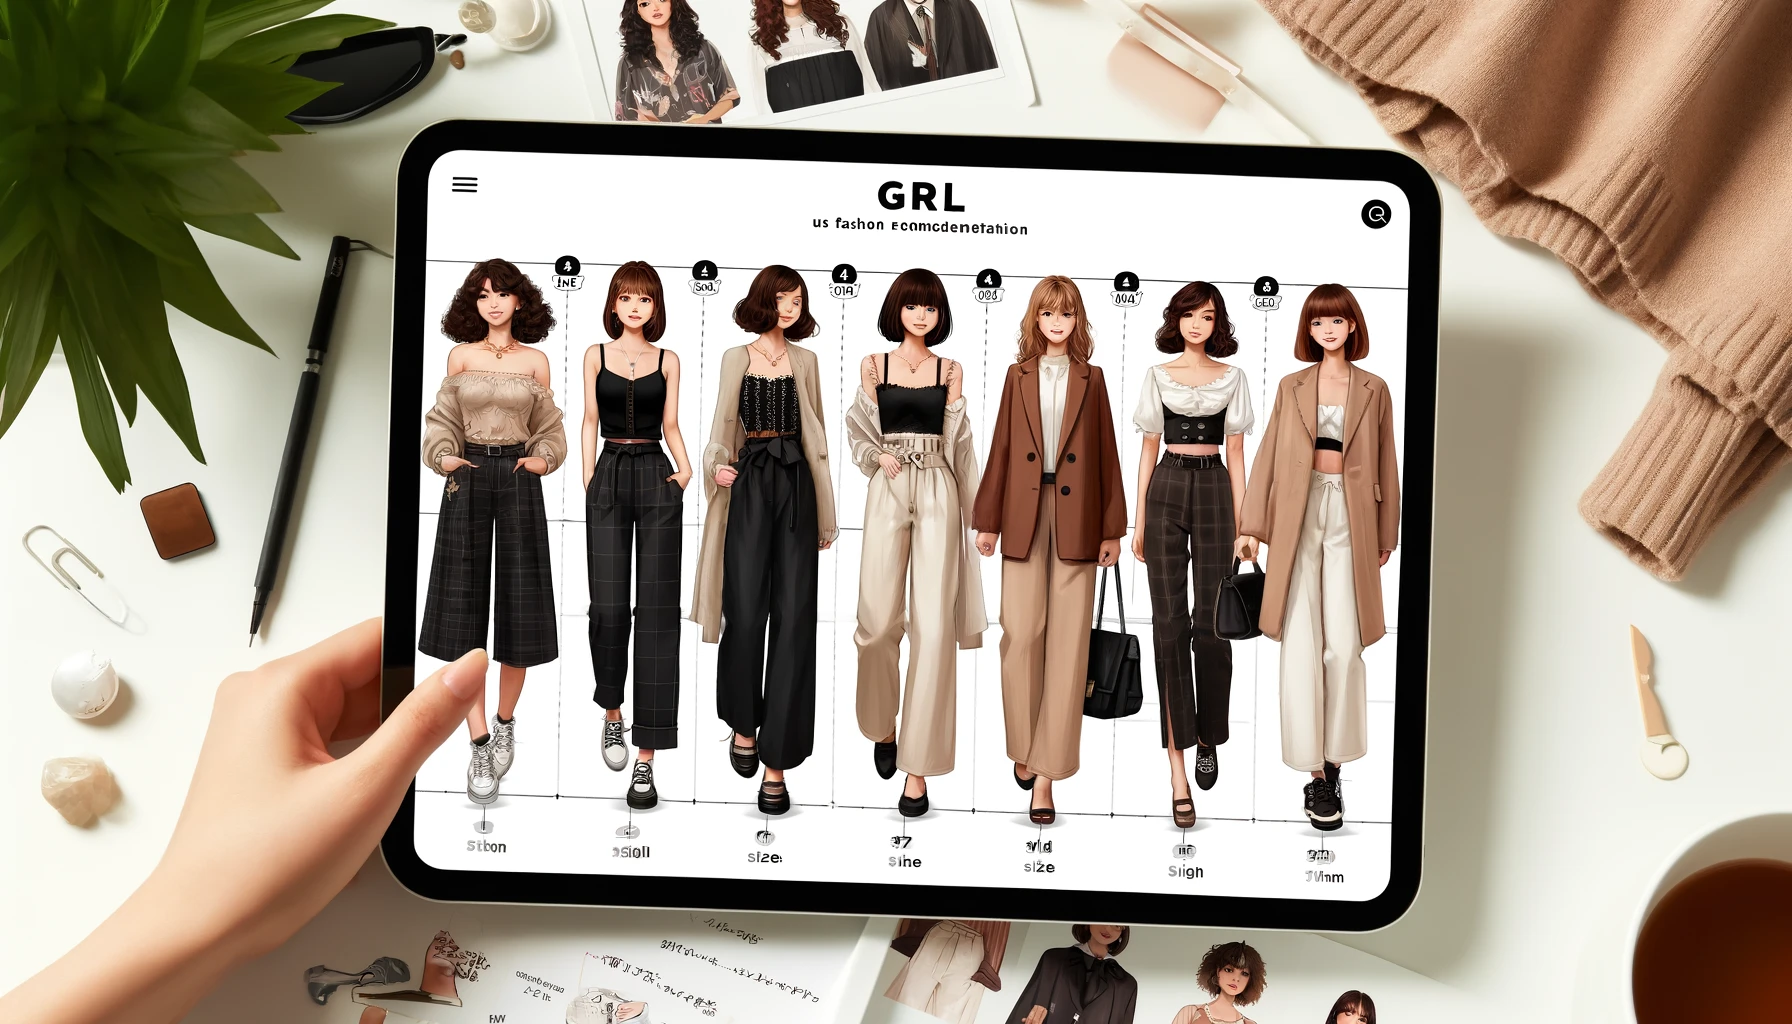 An image showing fashion coordination based on sizes for GRL (Grail), a budget-friendly women's fashion brand. The image features stylish Japanese women in various outfits that match different size recommendations. There are visual size charts, measurement tips, and fashion advice. The background is chic and modern with fashion-related design elements.